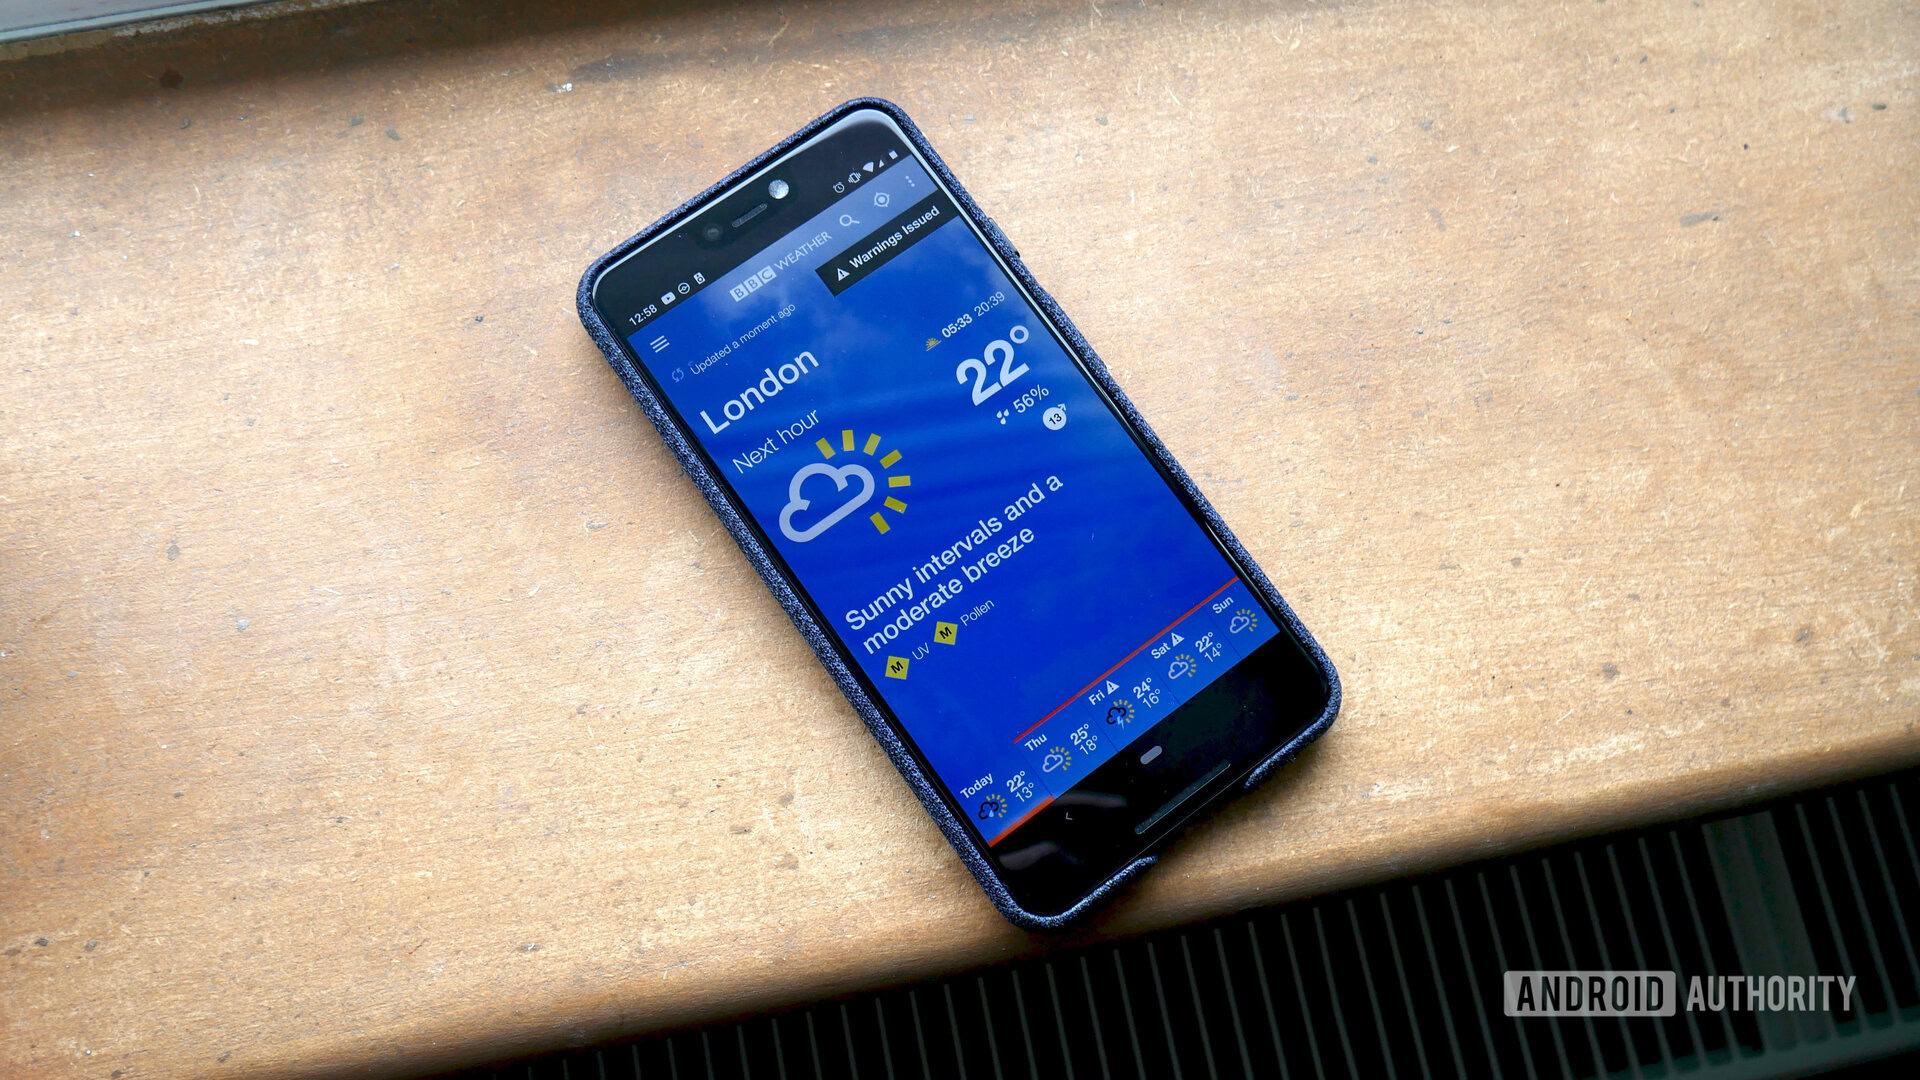 Best Uk Weather Forecast Apps For Android Android Authority